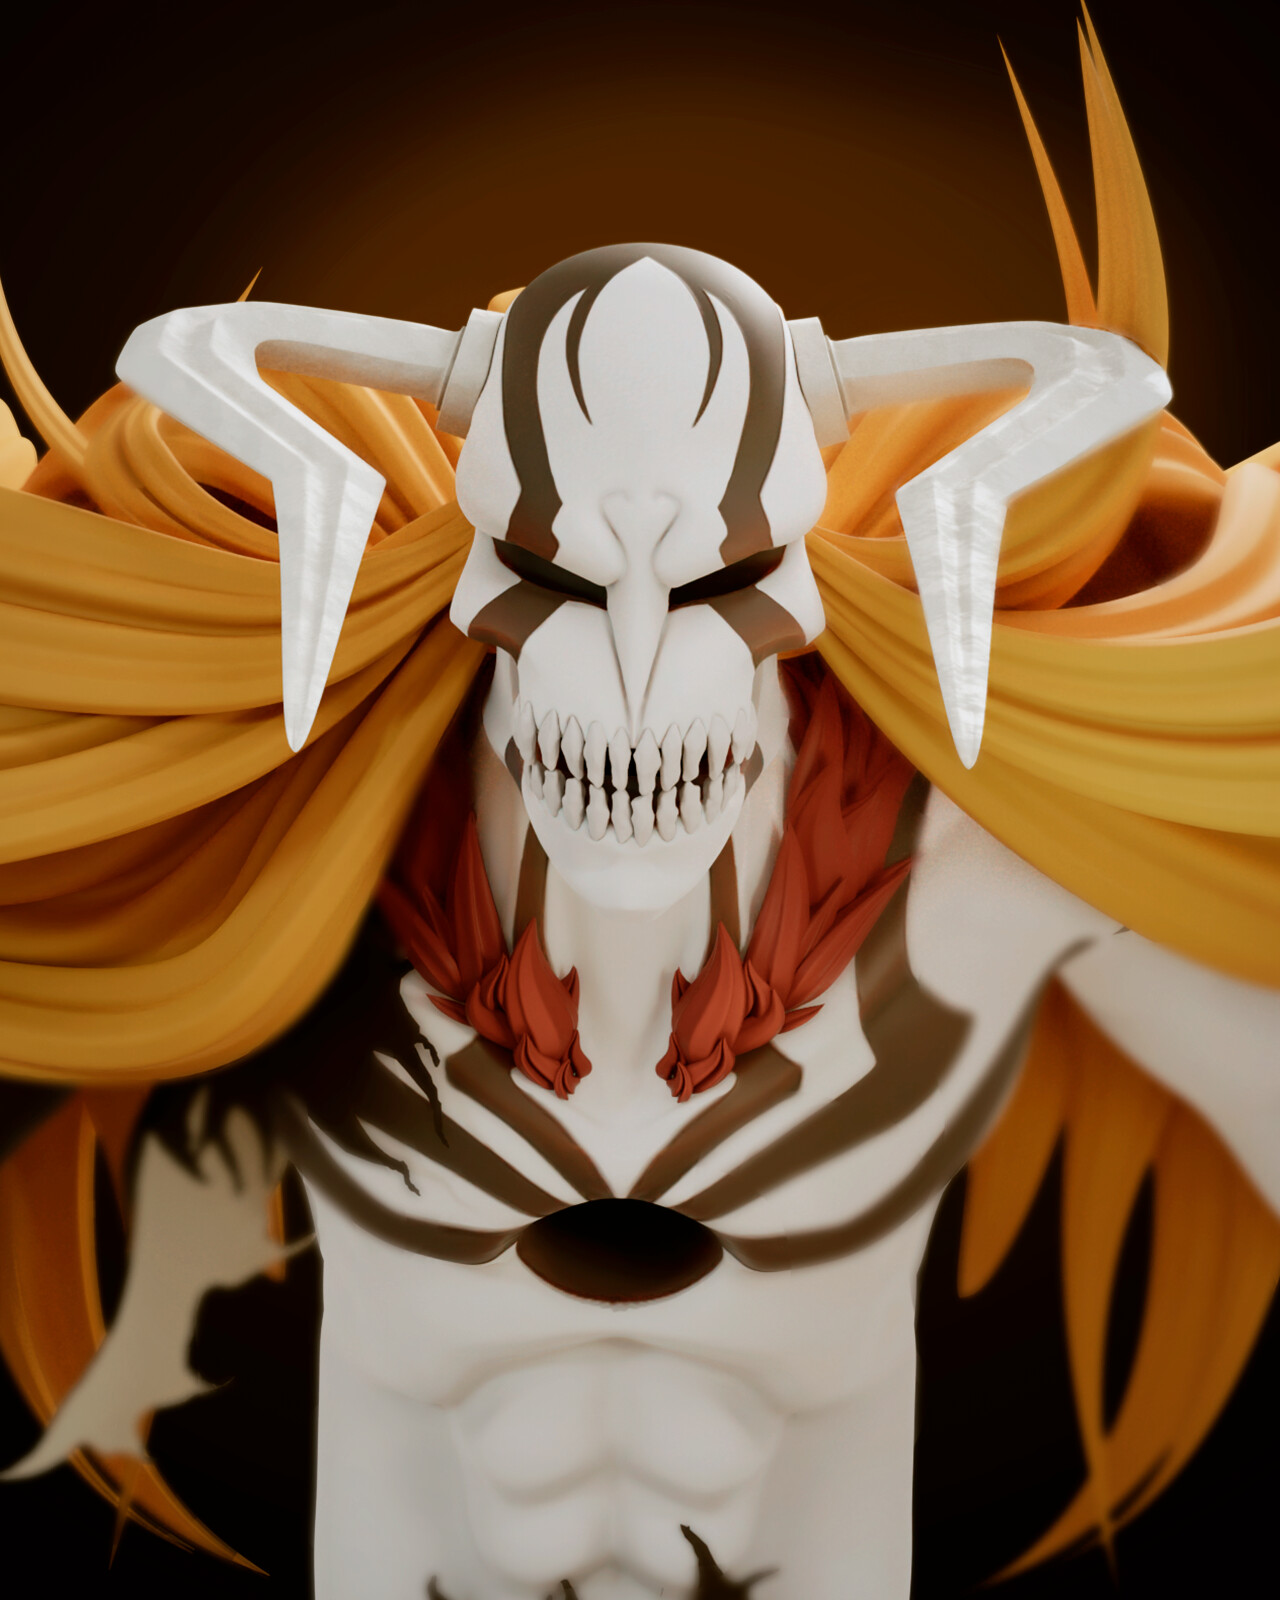  Vasto Lorde Mask from Bleach by Wingeddeath243